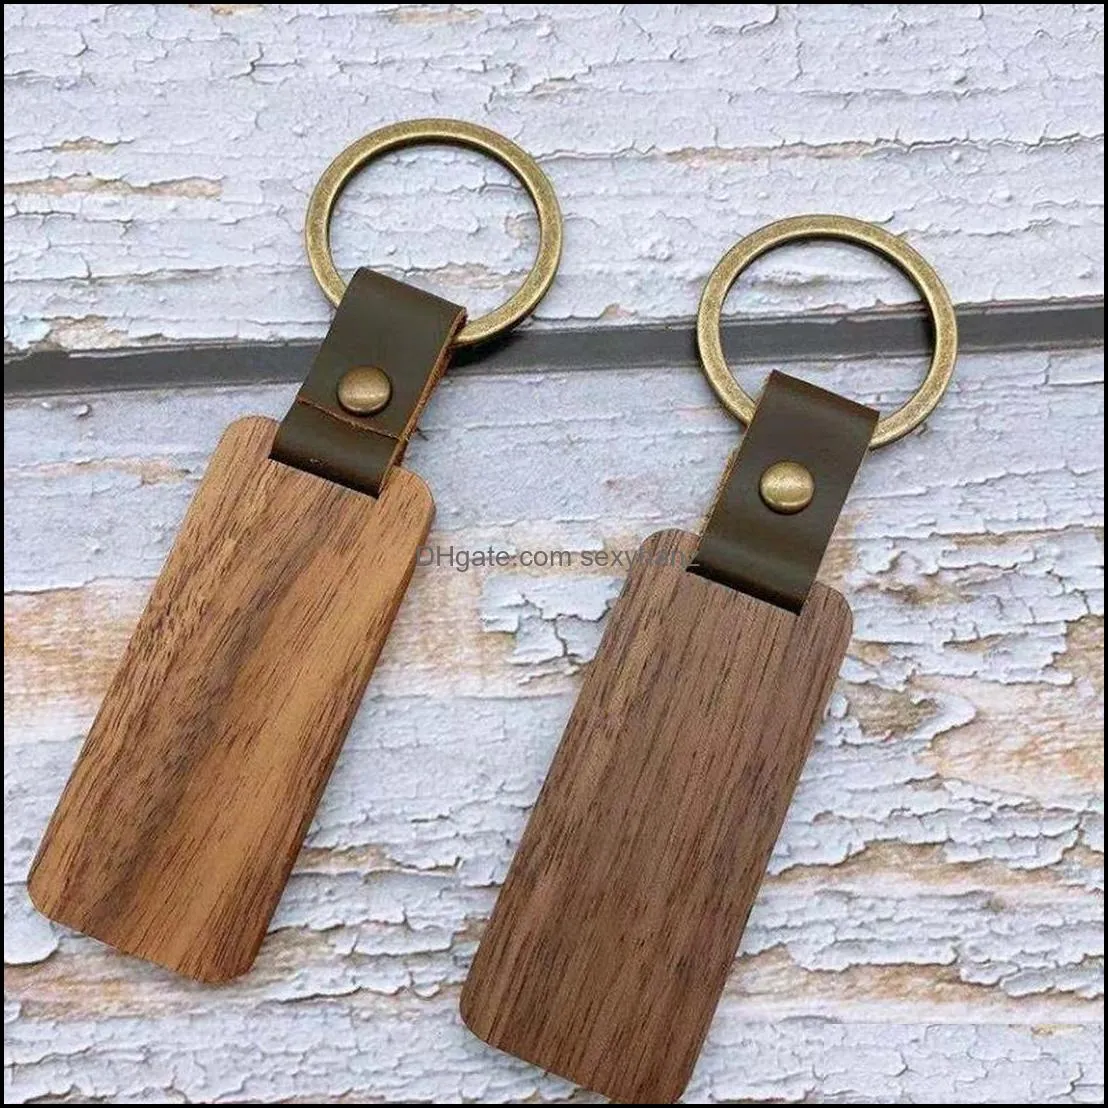 FAHMI Jewelry 2021 Personalized Leather Keychain Pendant Beech Wood Carving Keychains Luggage Decoration Key Ring DIY FaGiftGifts for